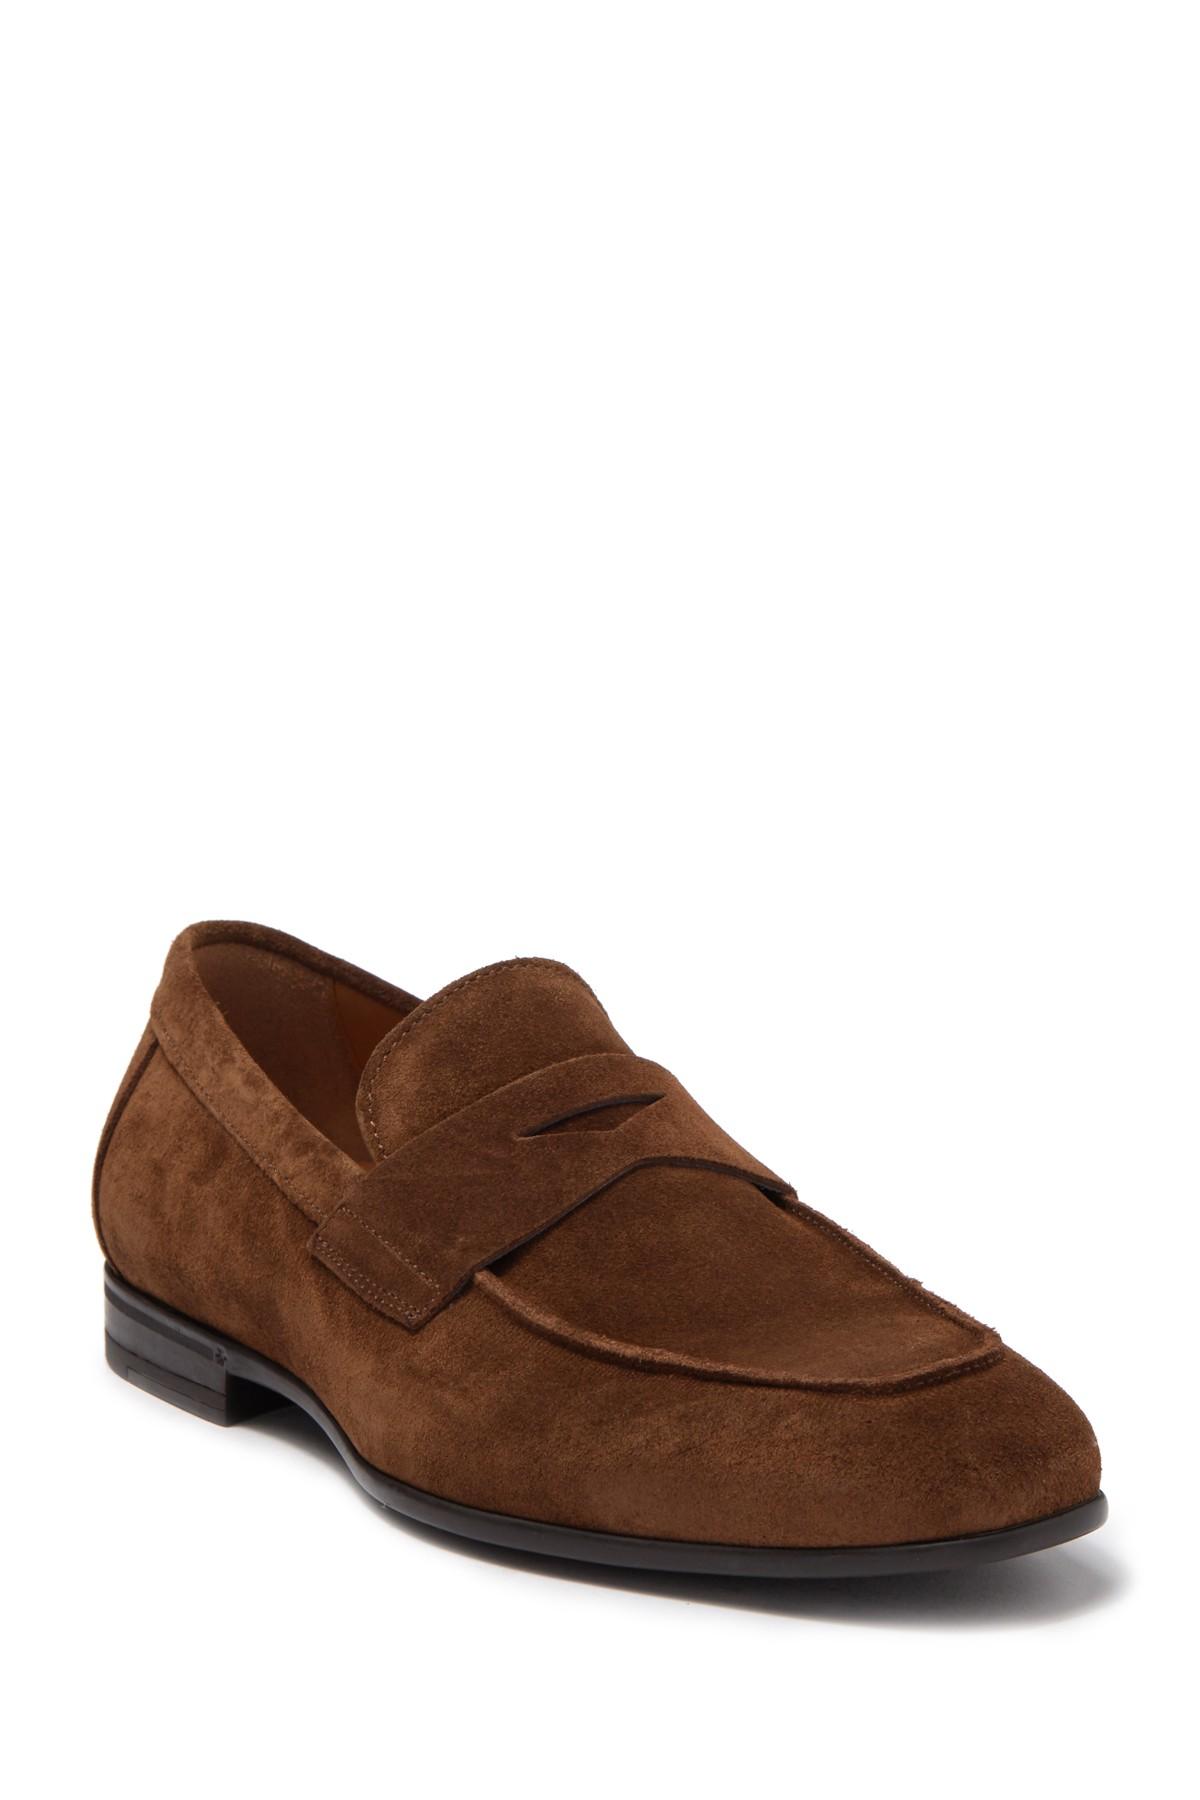 Bruno Magli Tino Suede Penny Loafer in Brown for Men - Lyst